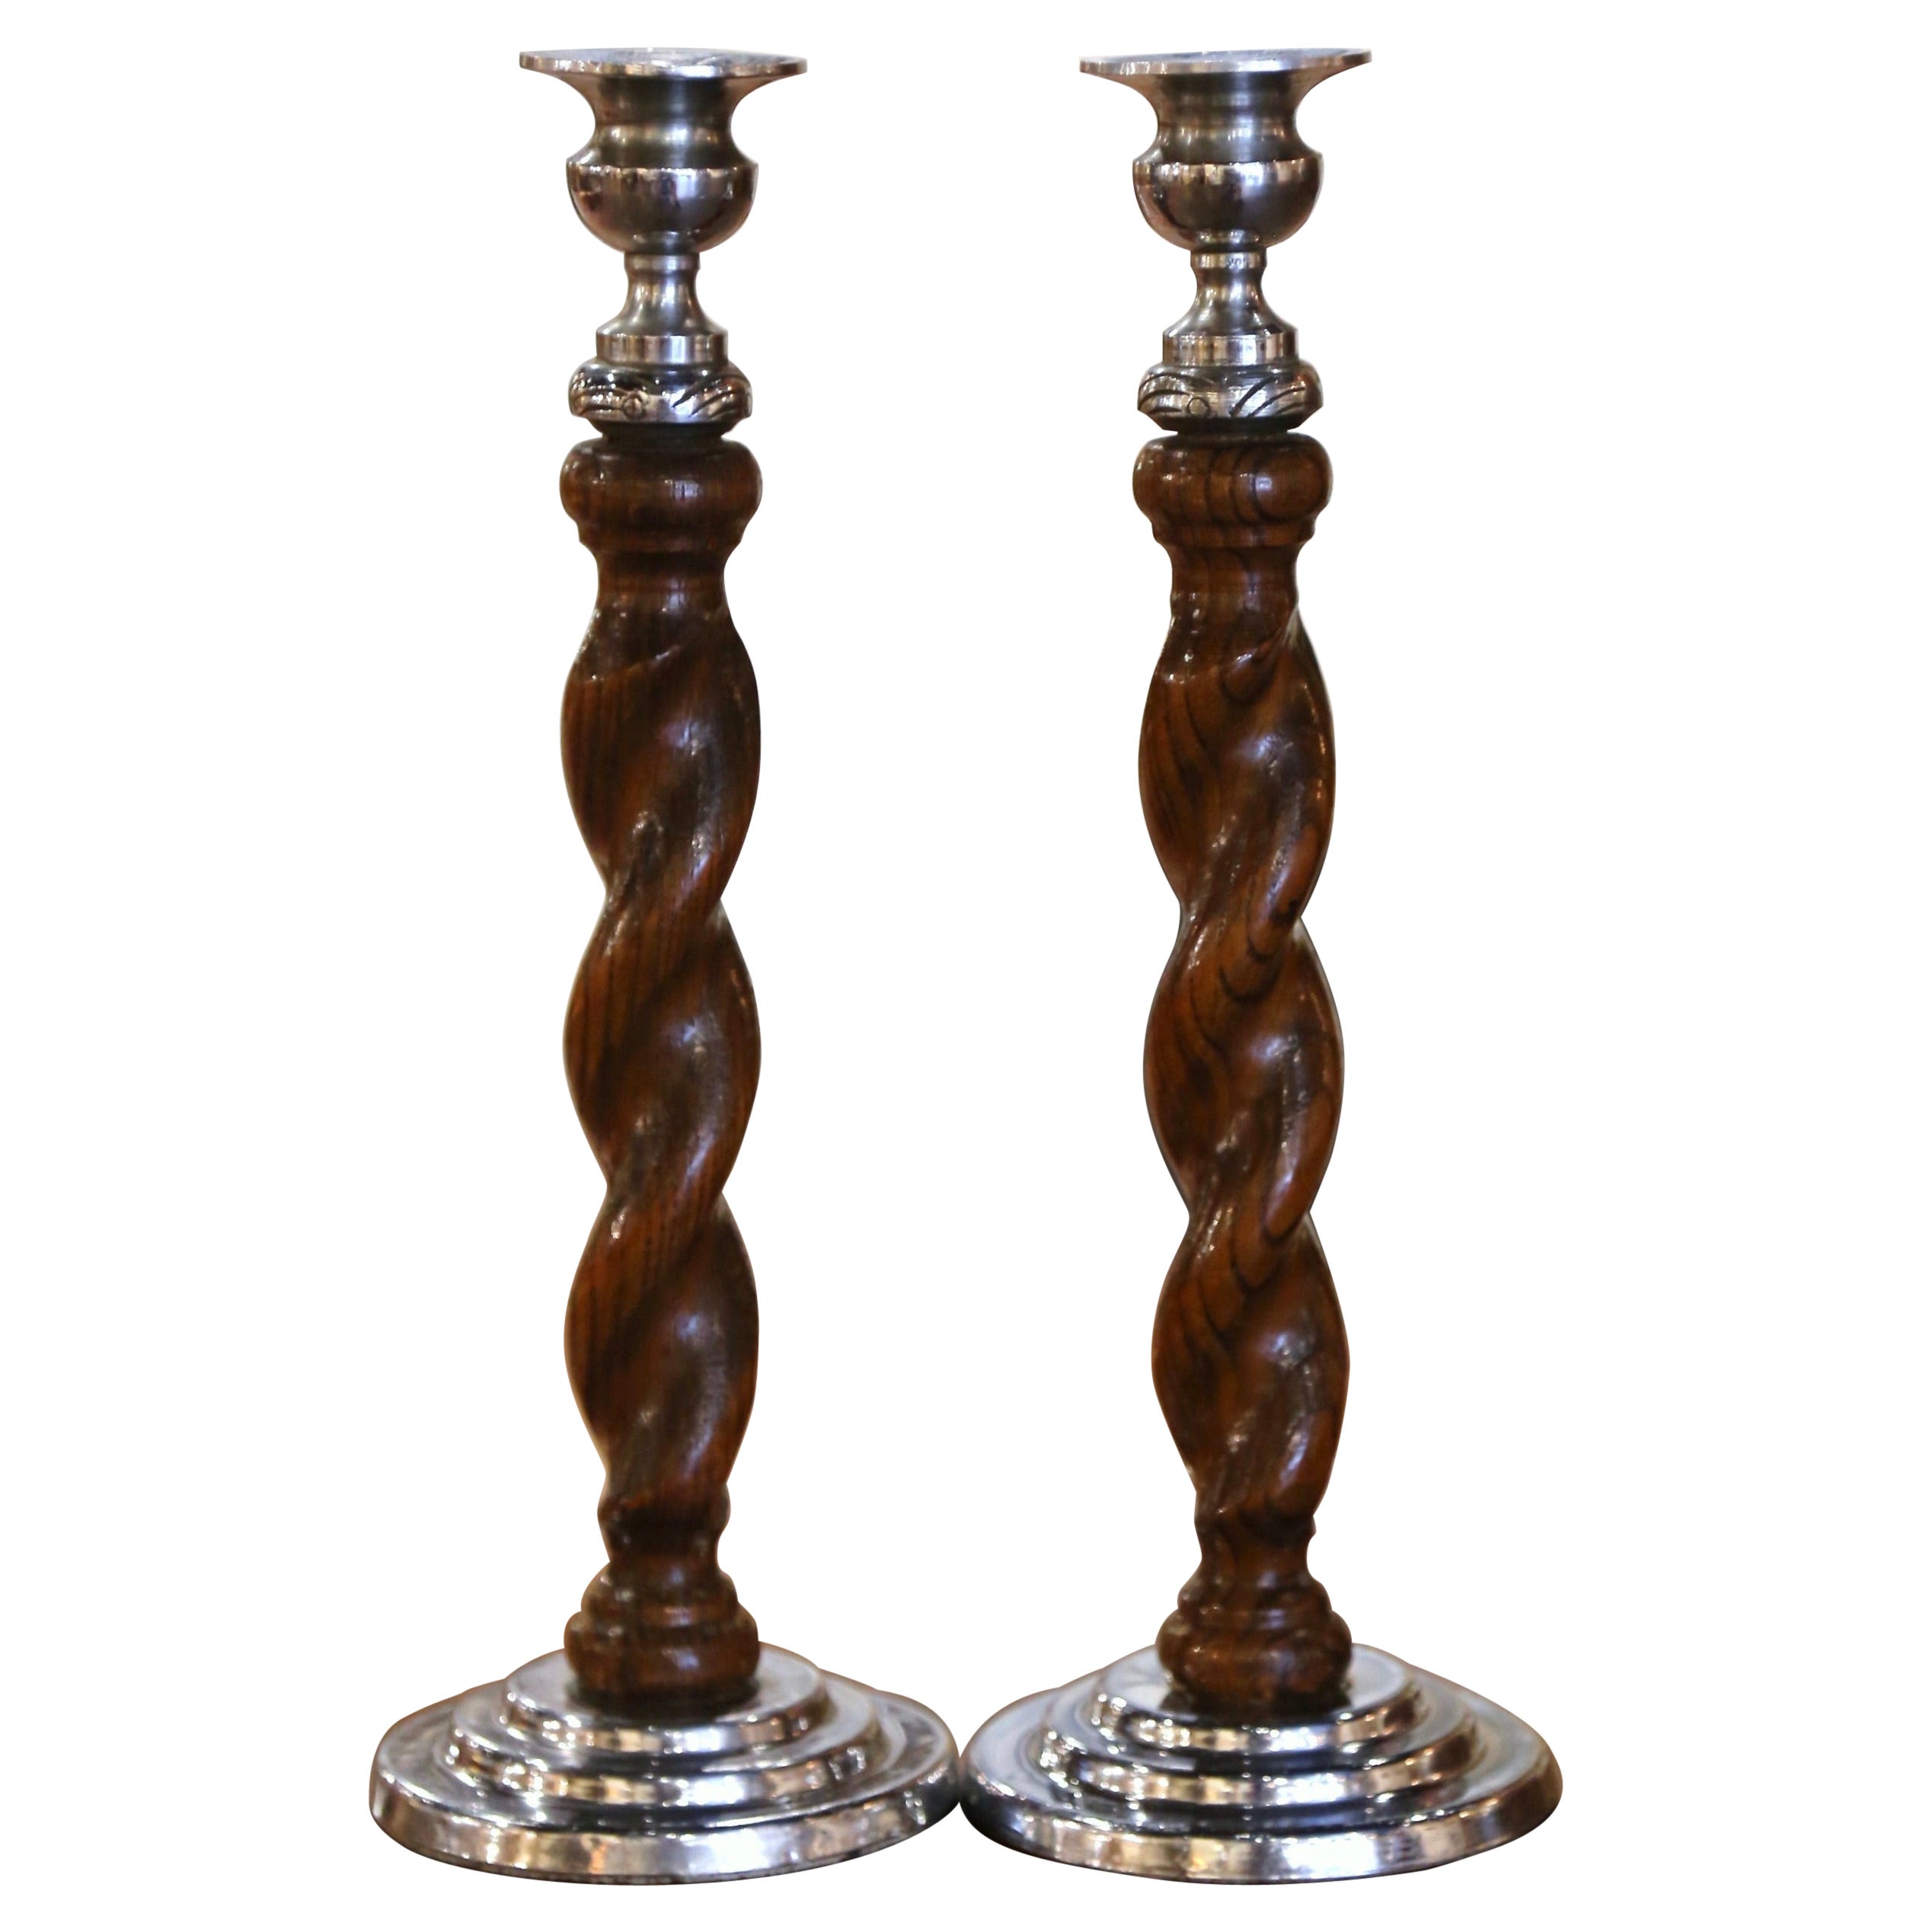 1920's Pair of English Carved Oak and Silverplated Barley Twist Candlesticks 